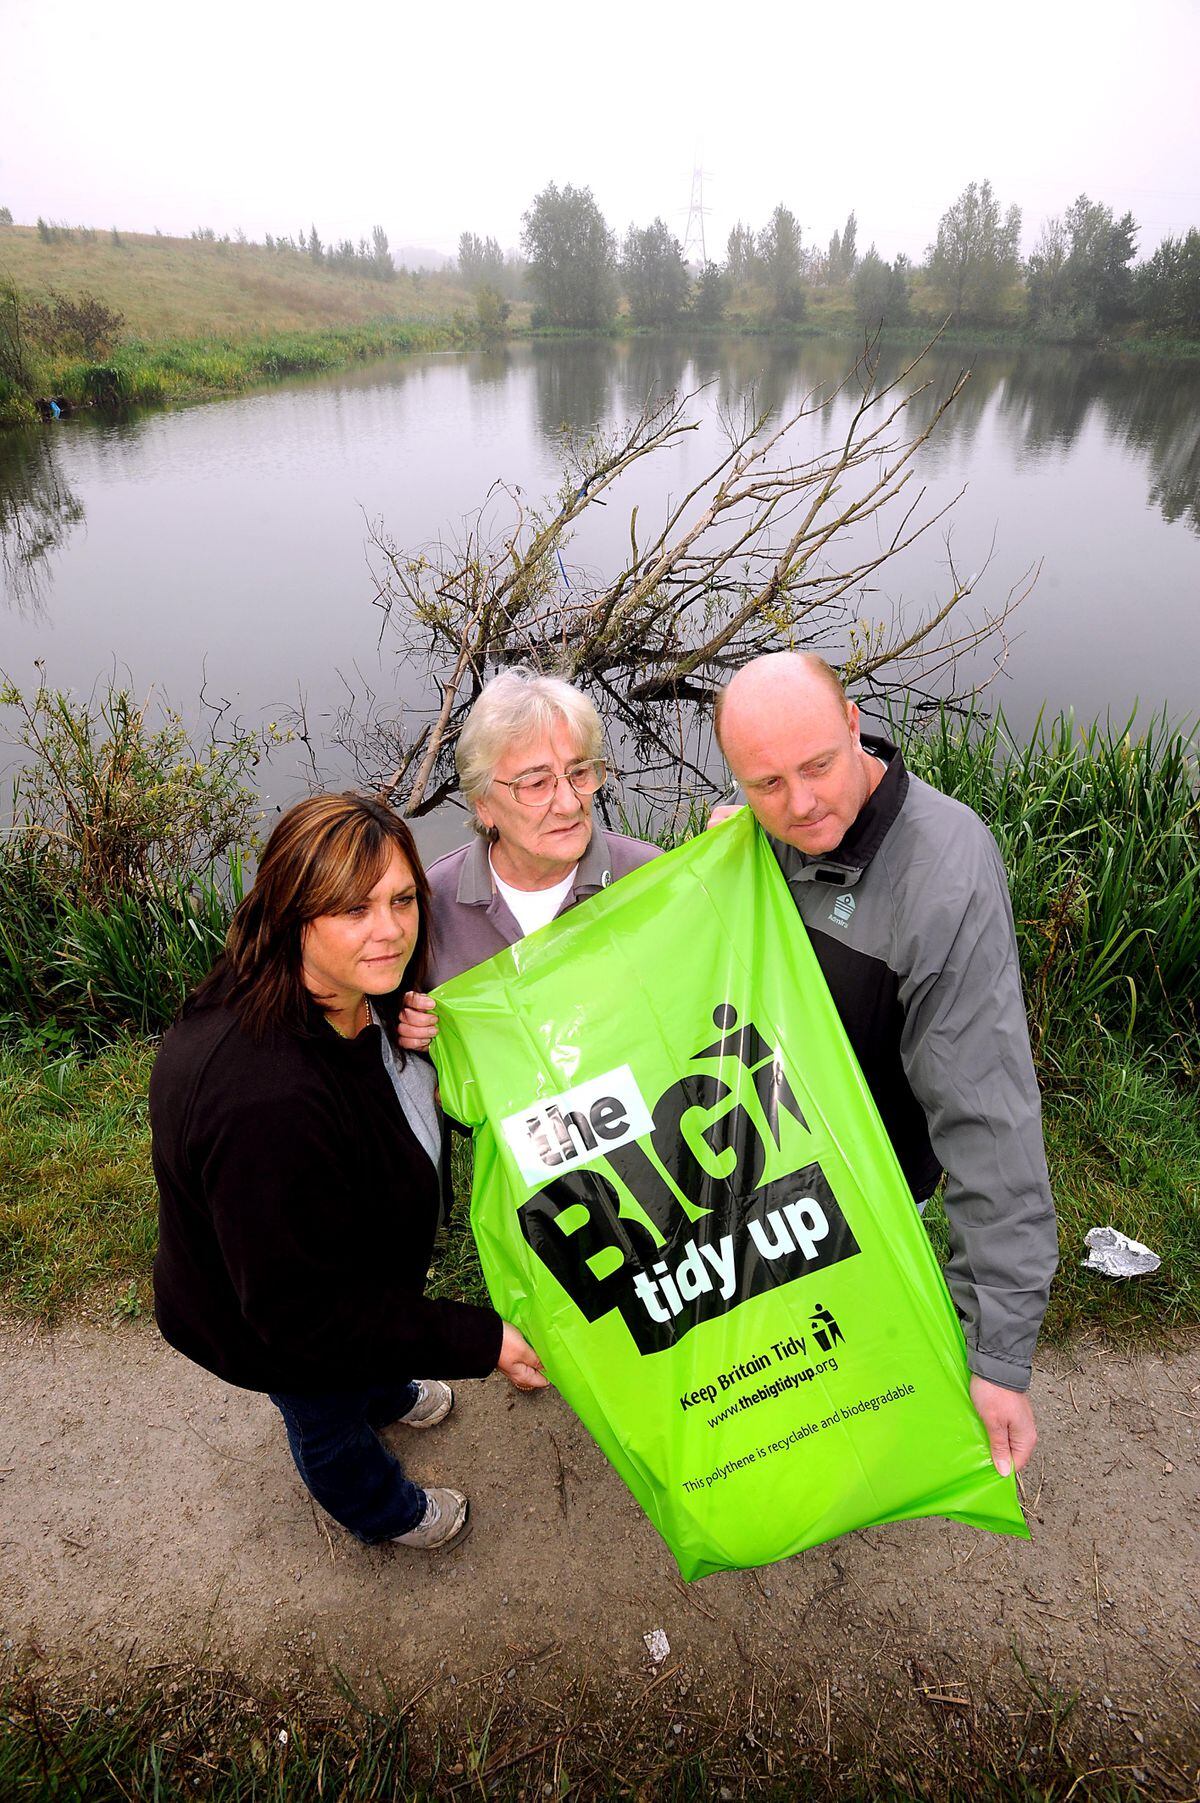 Ann Nightingale was a tireless campaigner. Here, she is with neighbourhood safety co-ordinator Lisa Parmar and John Goalby of Bilston East Neighbourhood Partnership, standing at the spot where Shane Owoo drowned, as they were getting ready for the big clean up at Bailey's Pool, The Lunt.